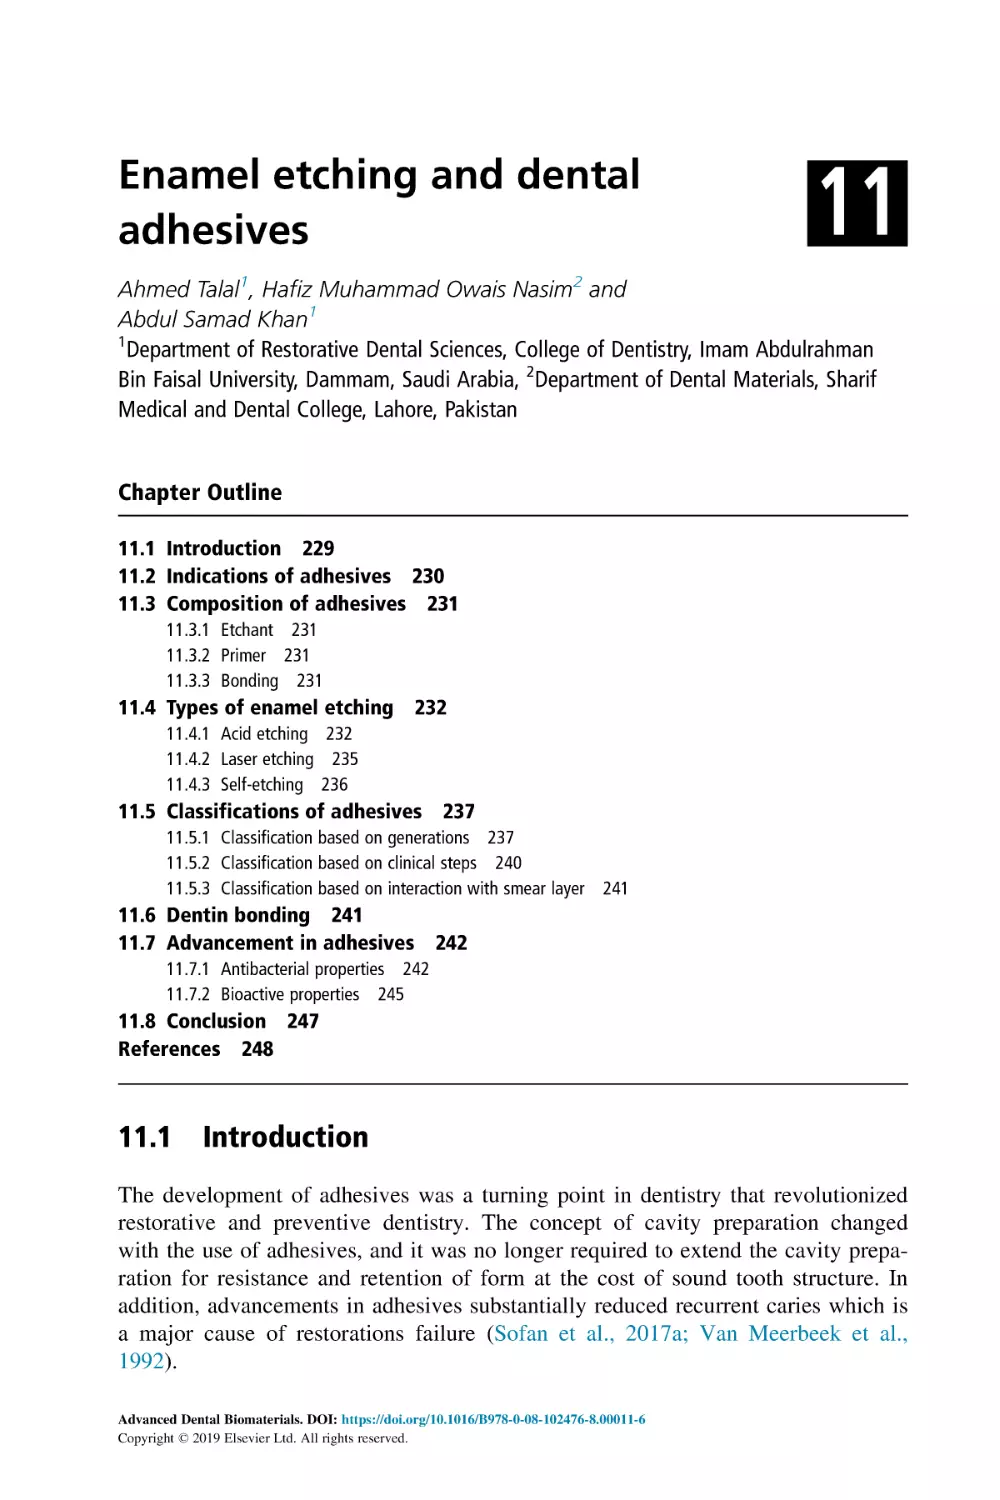 11 Enamel etching and dental adhesives
Chapter Outline
11.1 Introduction